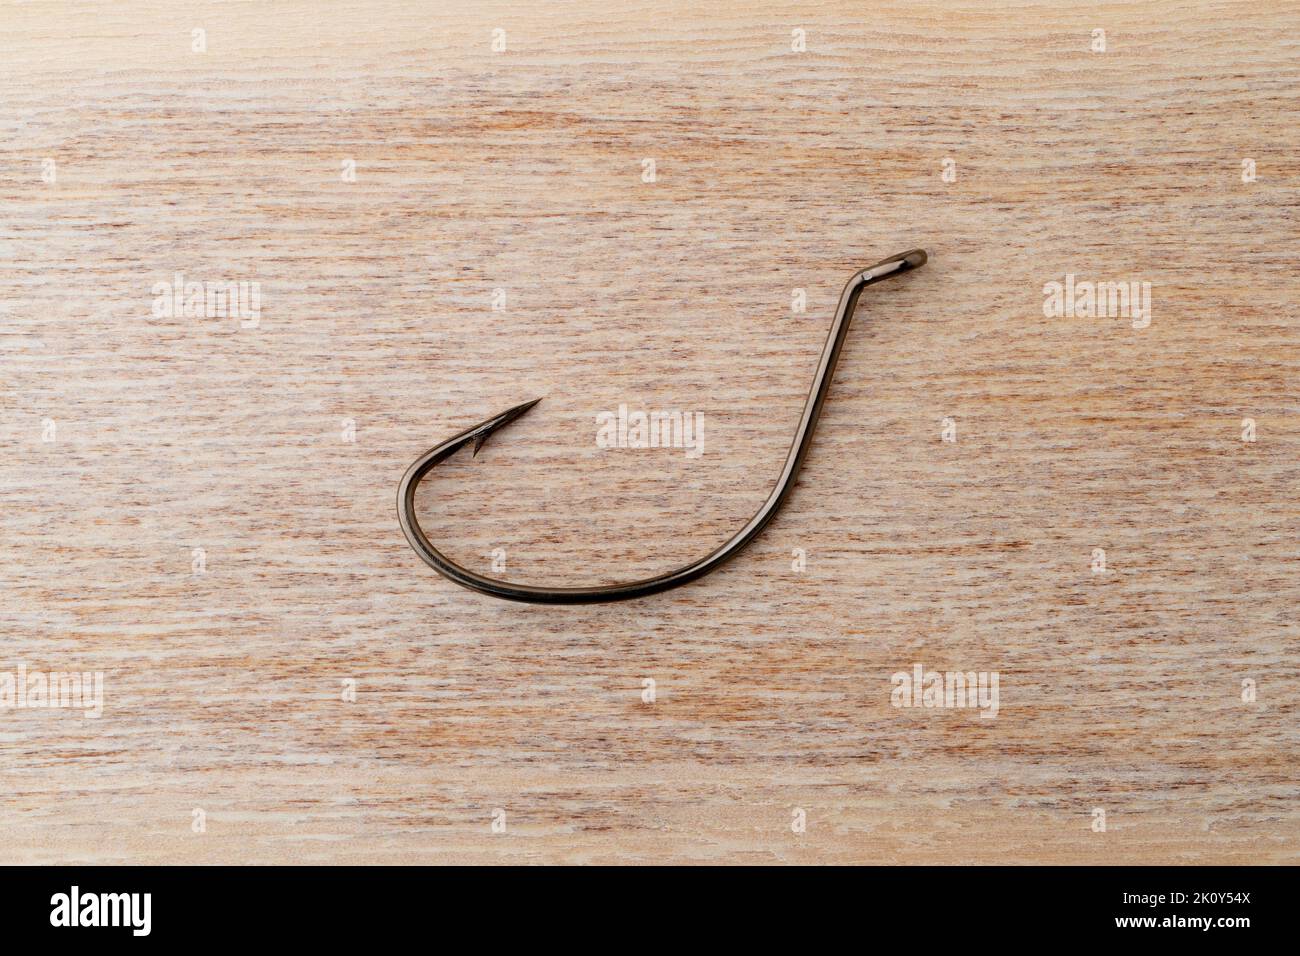 Top view of a new drop shot fish hook on a wood surface. Stock Photo